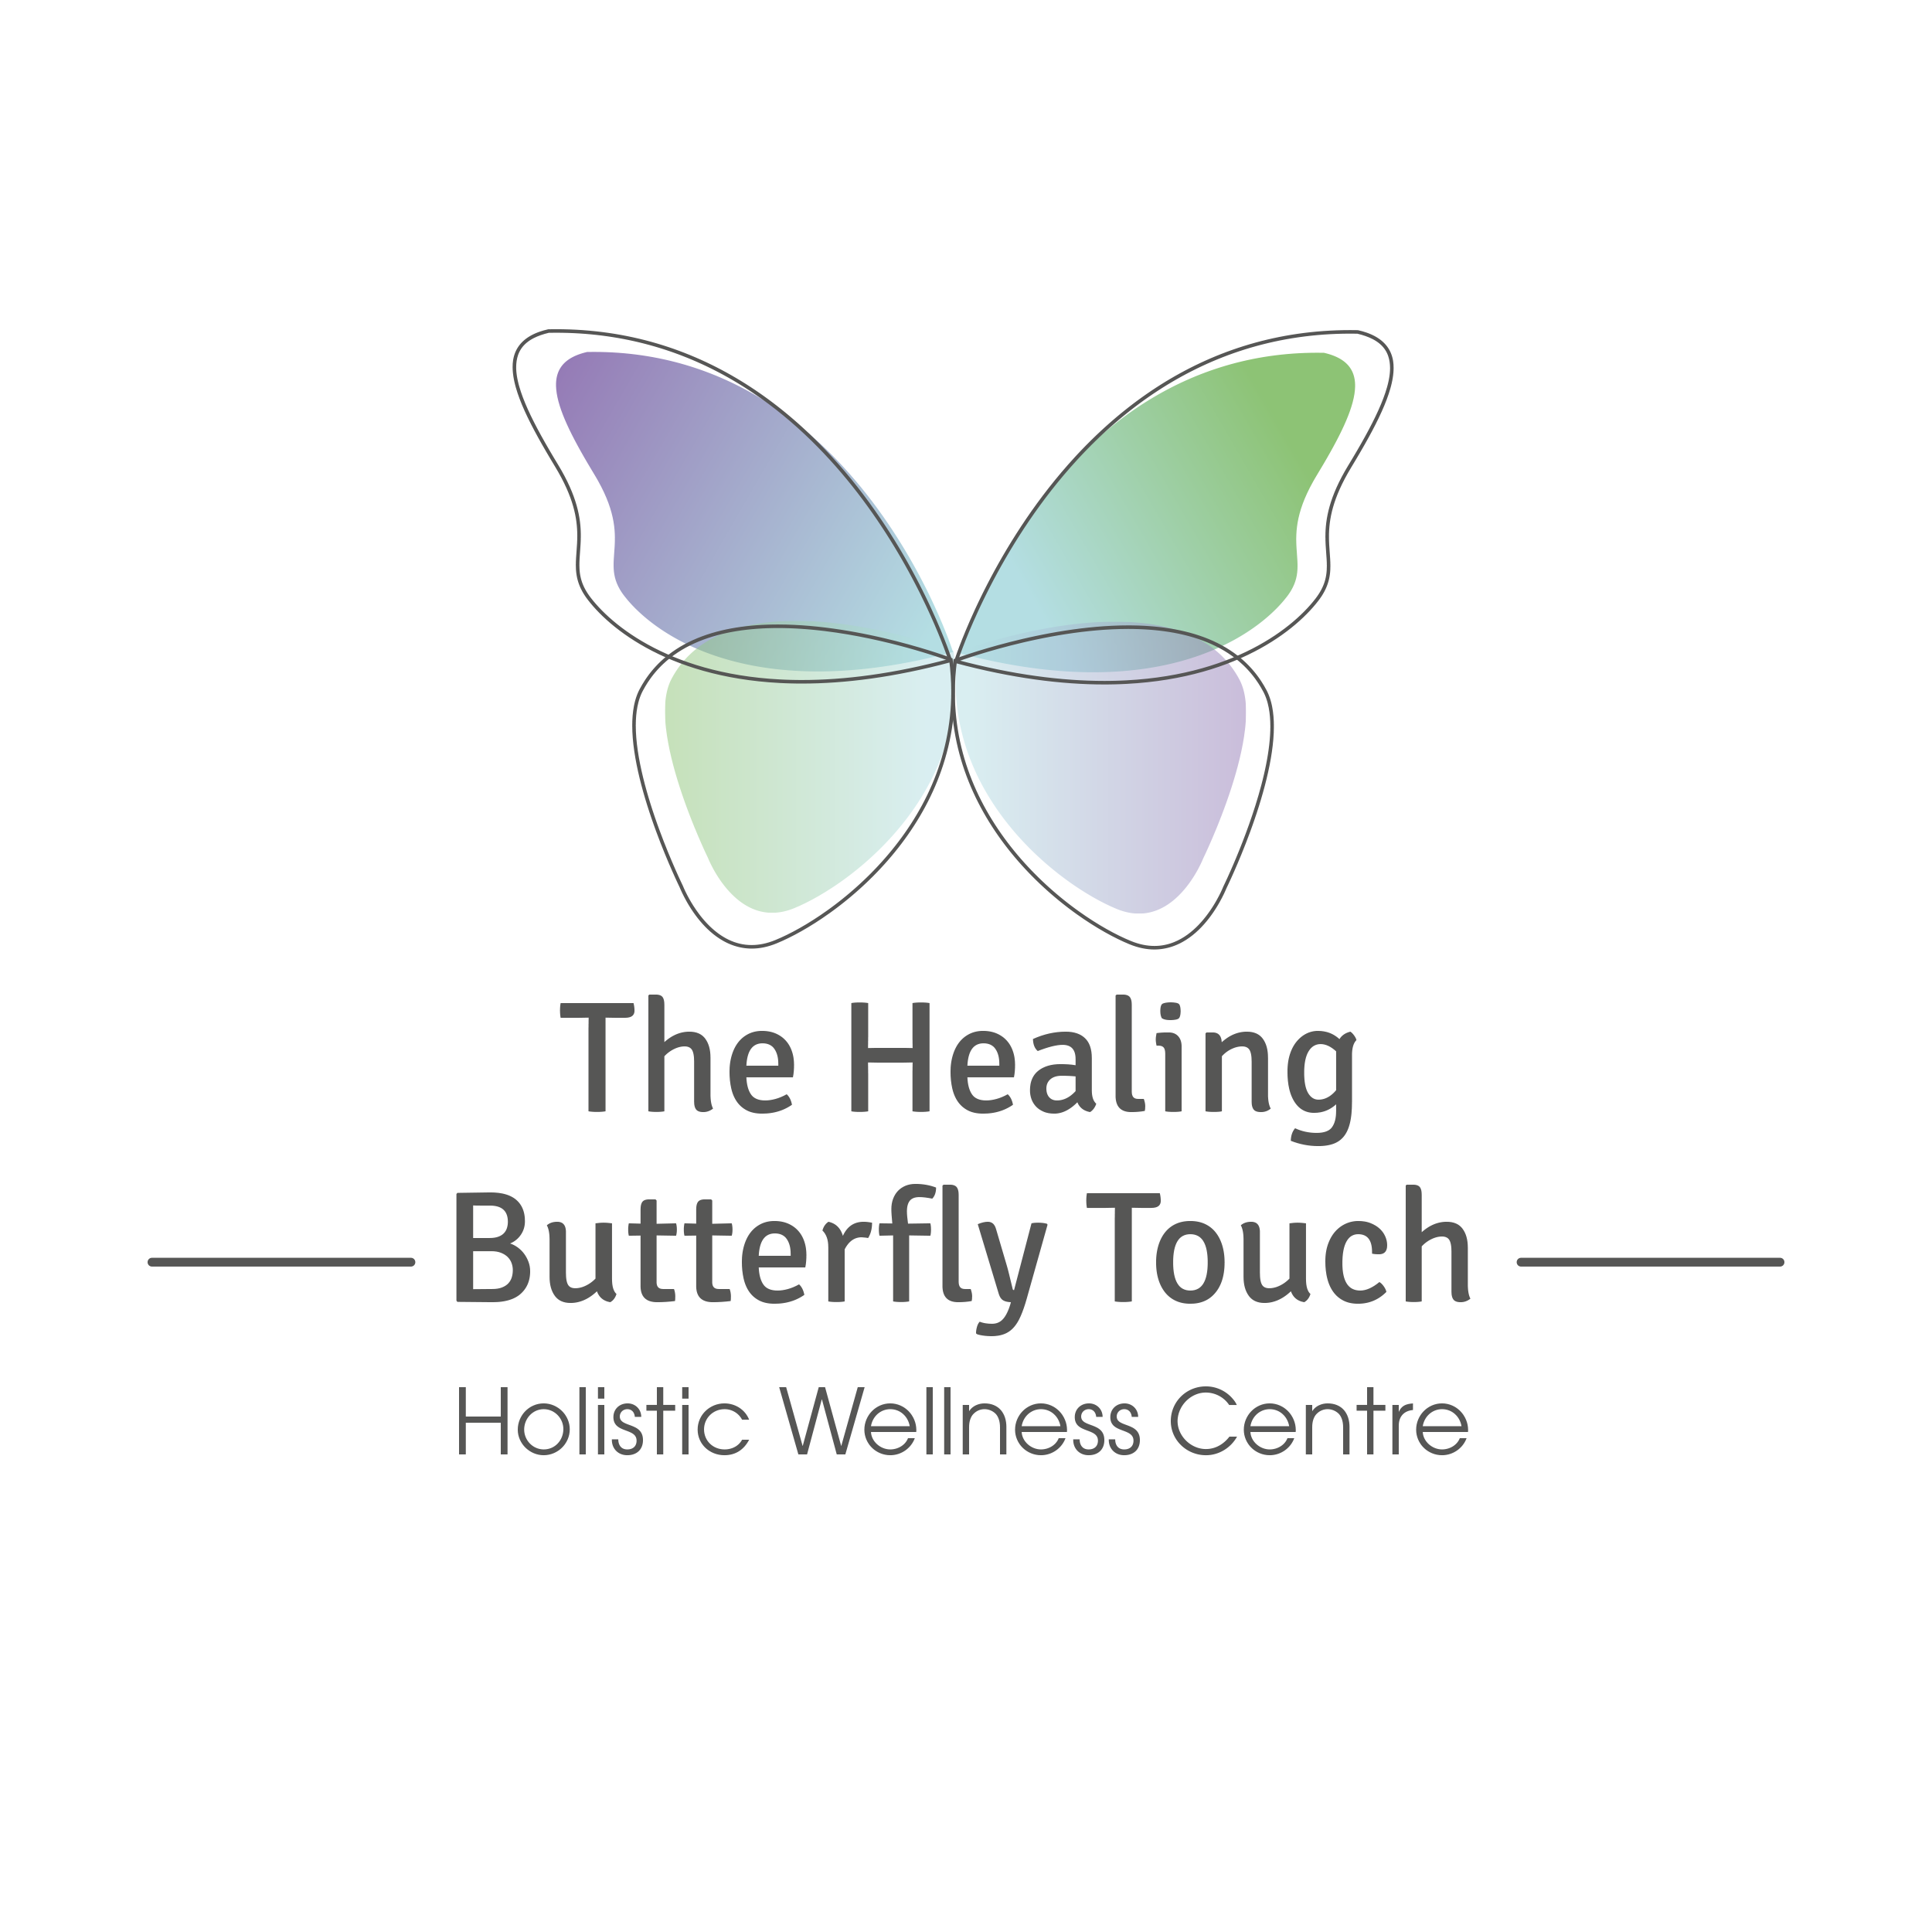 The Healing Butterfly Touch